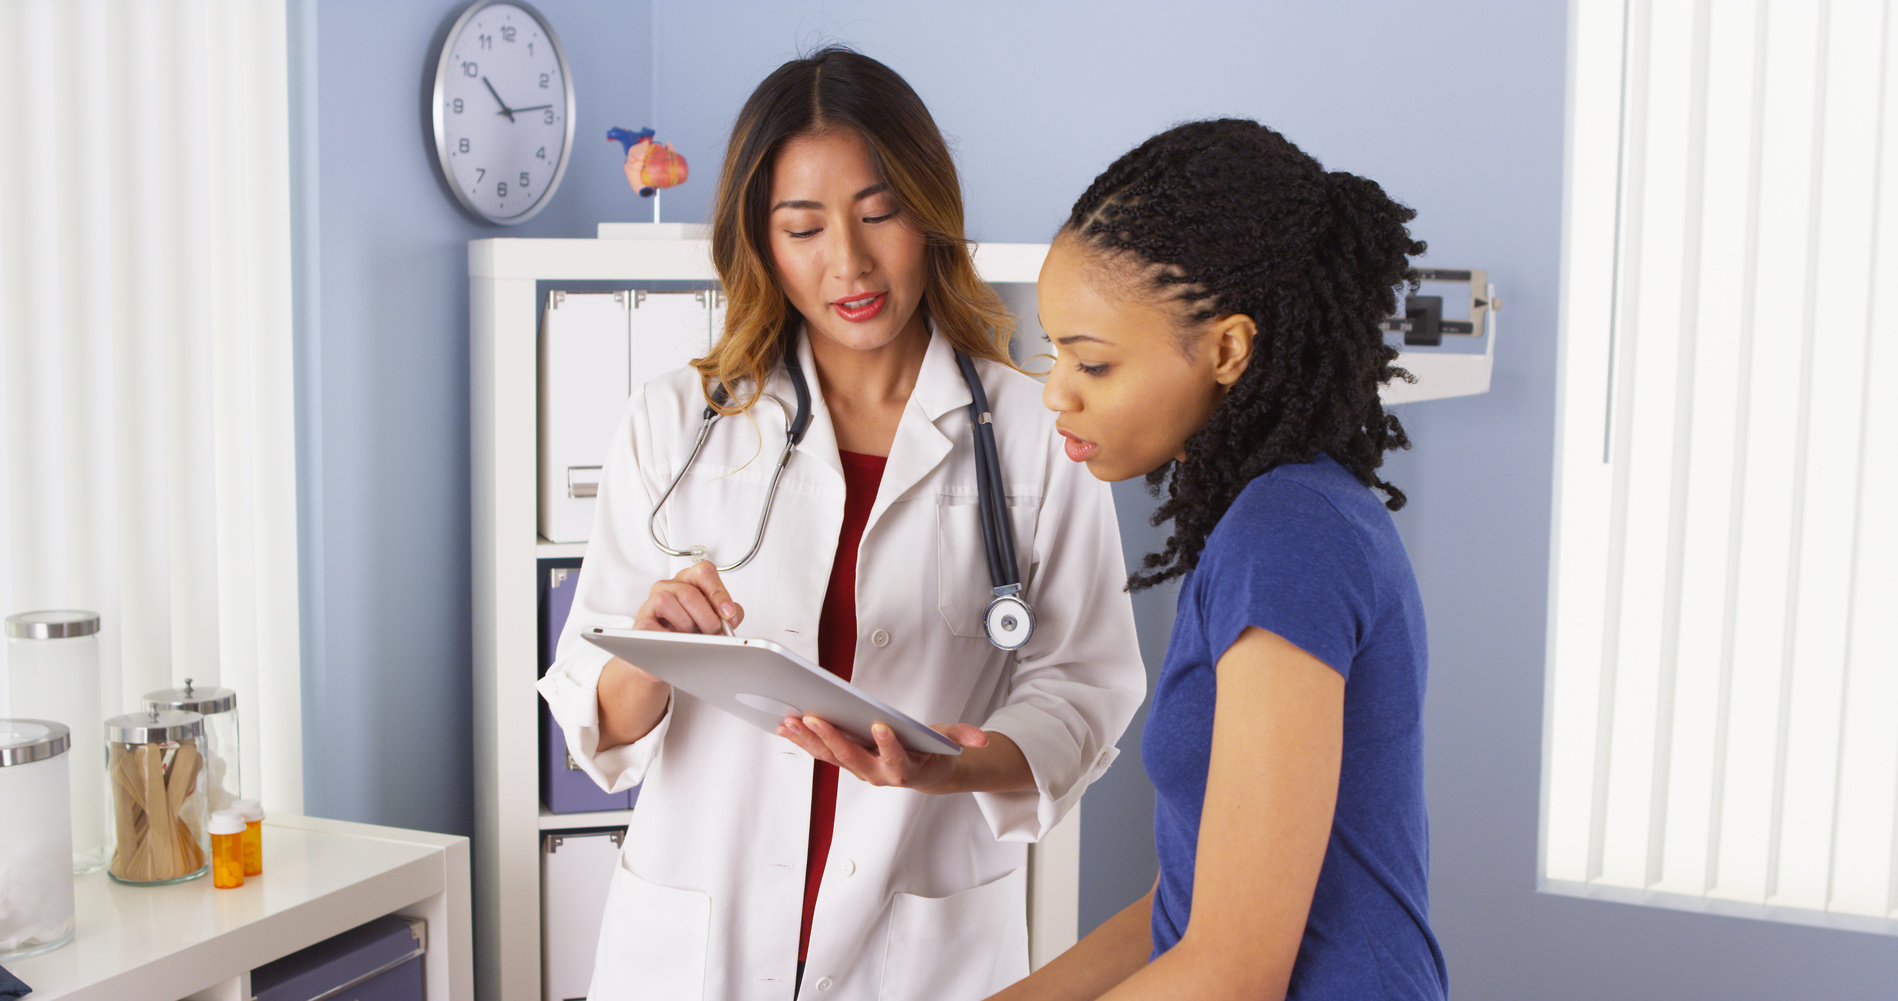 Survey: Most Nurse Practitioners Help Decode Medical Info for Their Patients